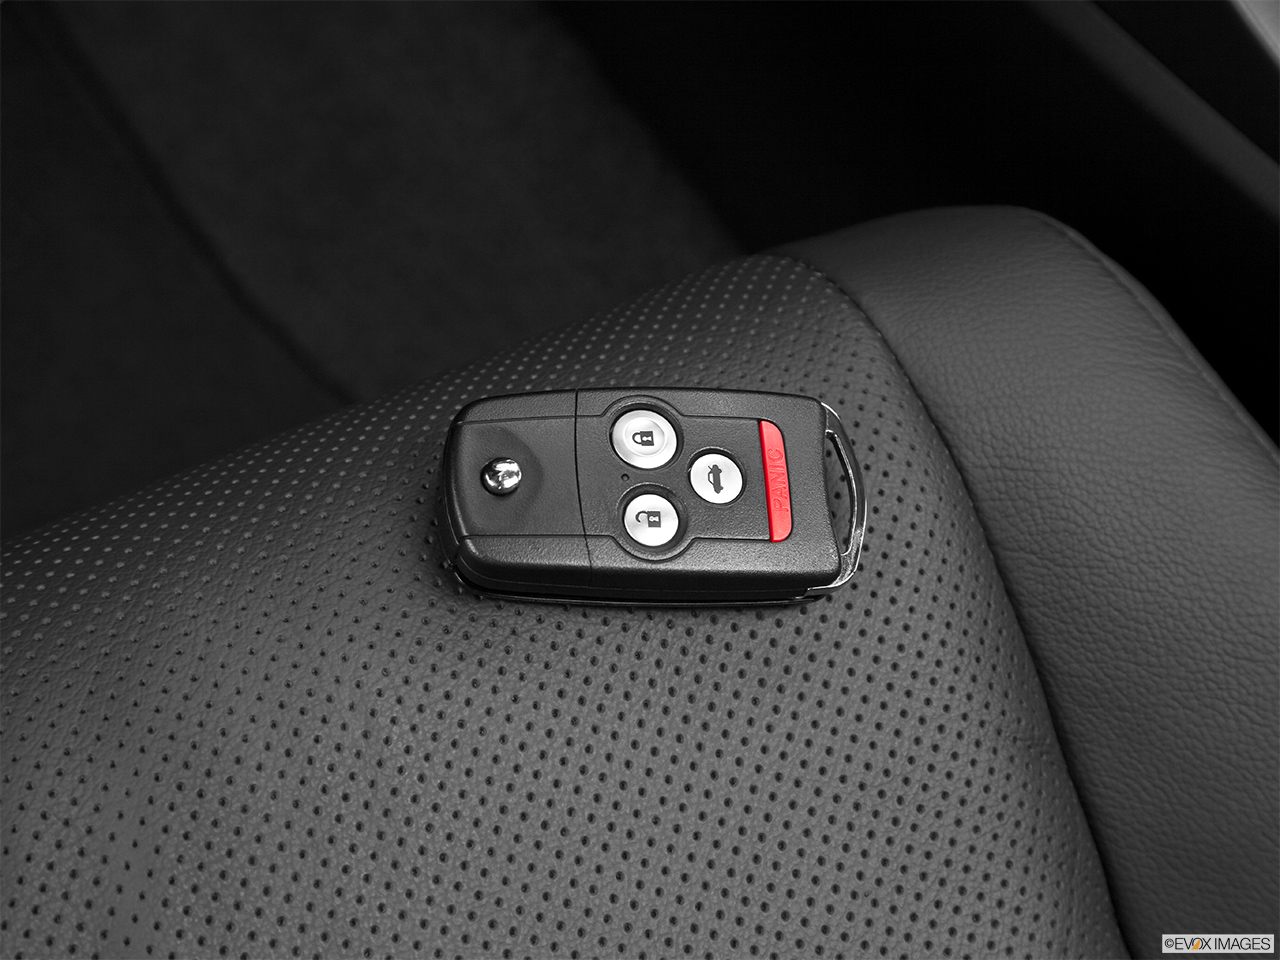 2013 Acura TSX 5-Speed Automatic Key fob on driver's seat. 